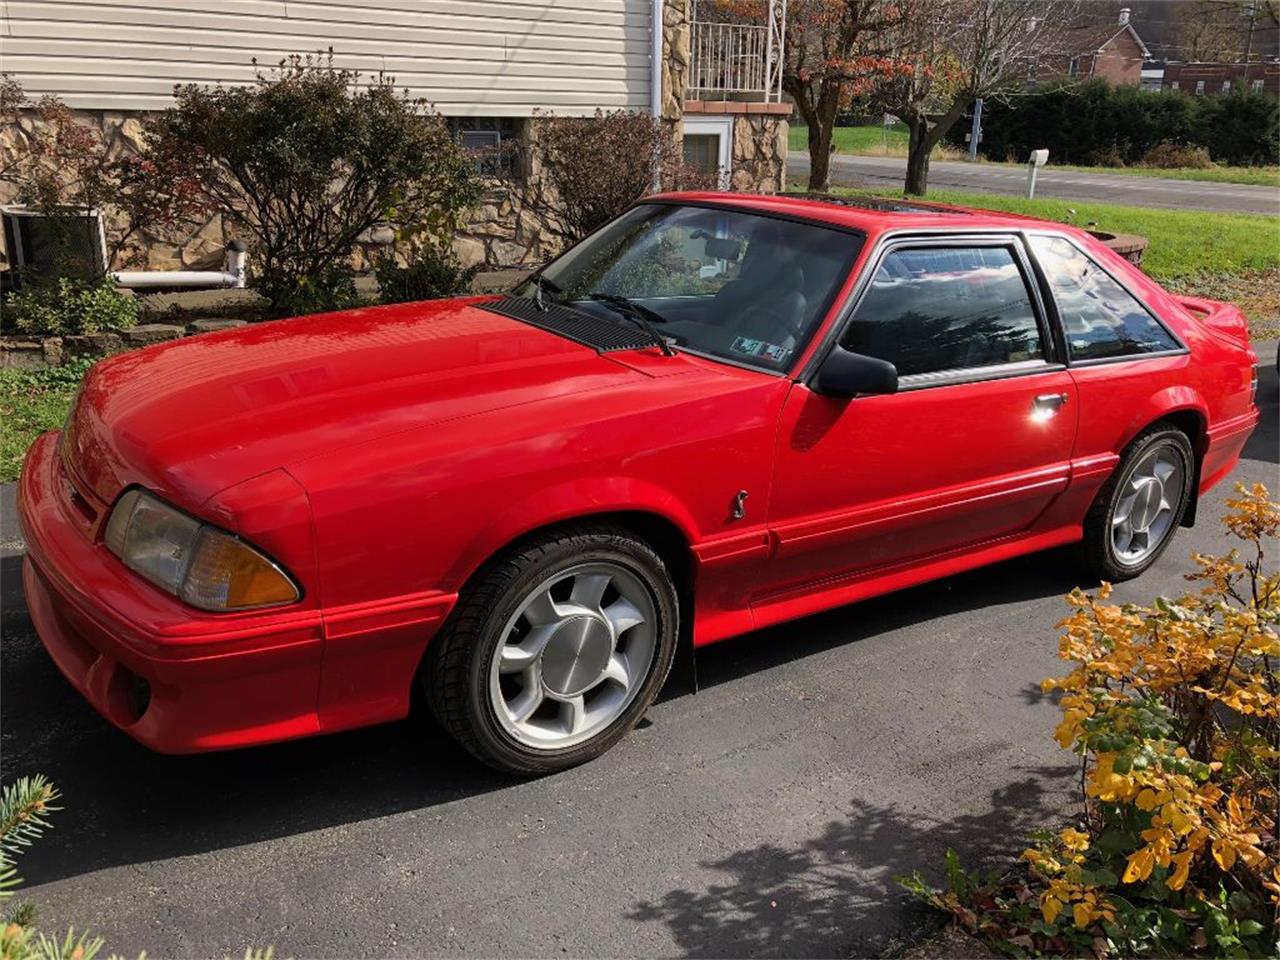 1993 Ford Mustang Cobra for Sale | ClassicCars.com | CC ...